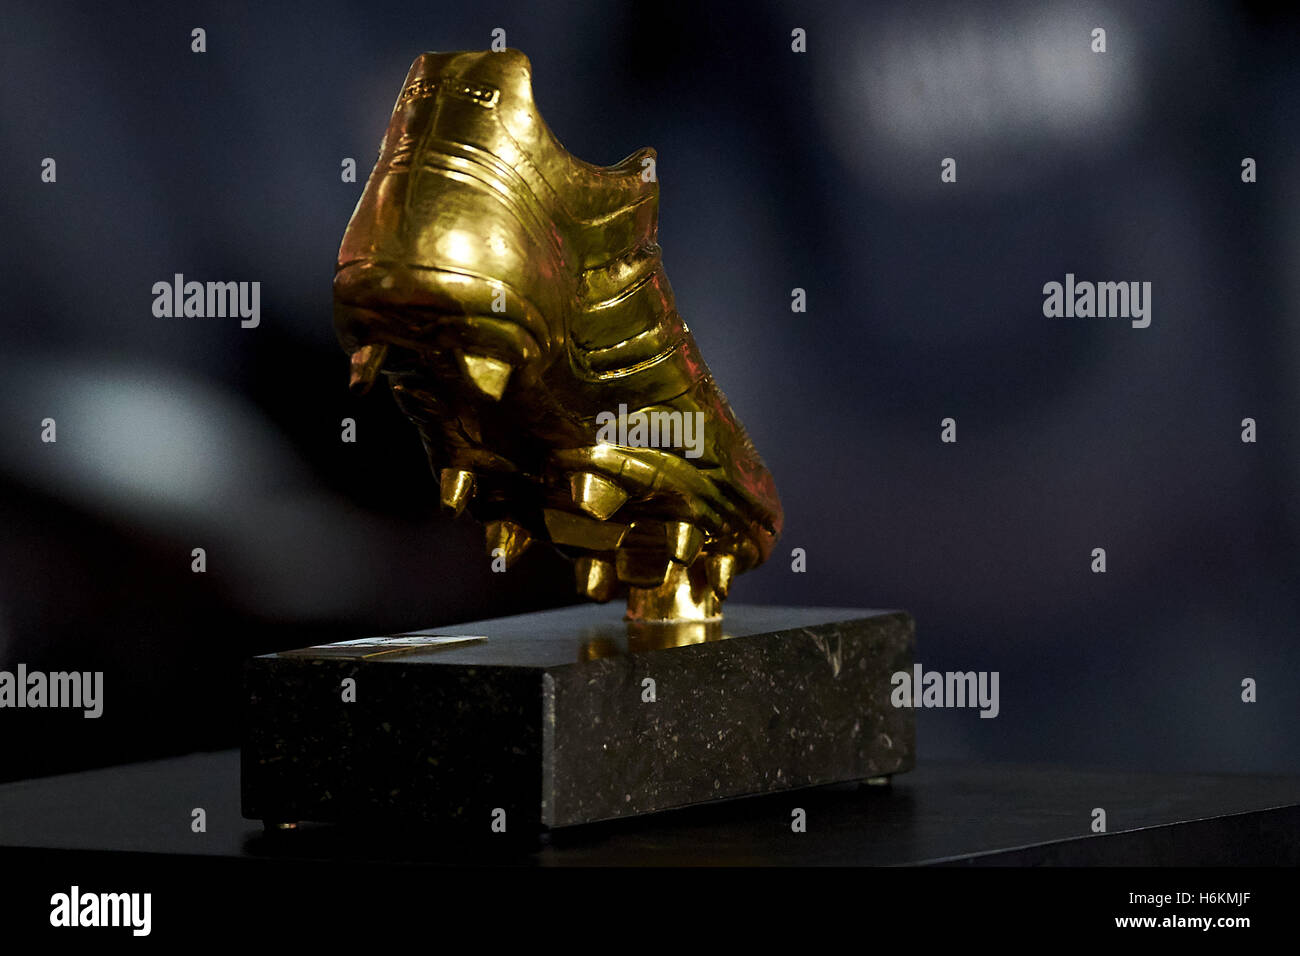 Barcelona, Spain. 29th Oct, 2016. A detail of the Golden Boot prior La Liga soccer match between FC Barcelona and Granada CF, at the Camp Nou stadium in Barcelona, Spain, saturday, october 29, 2016. Foto: S.Lau © dpa/Alamy Live News Stock Photo